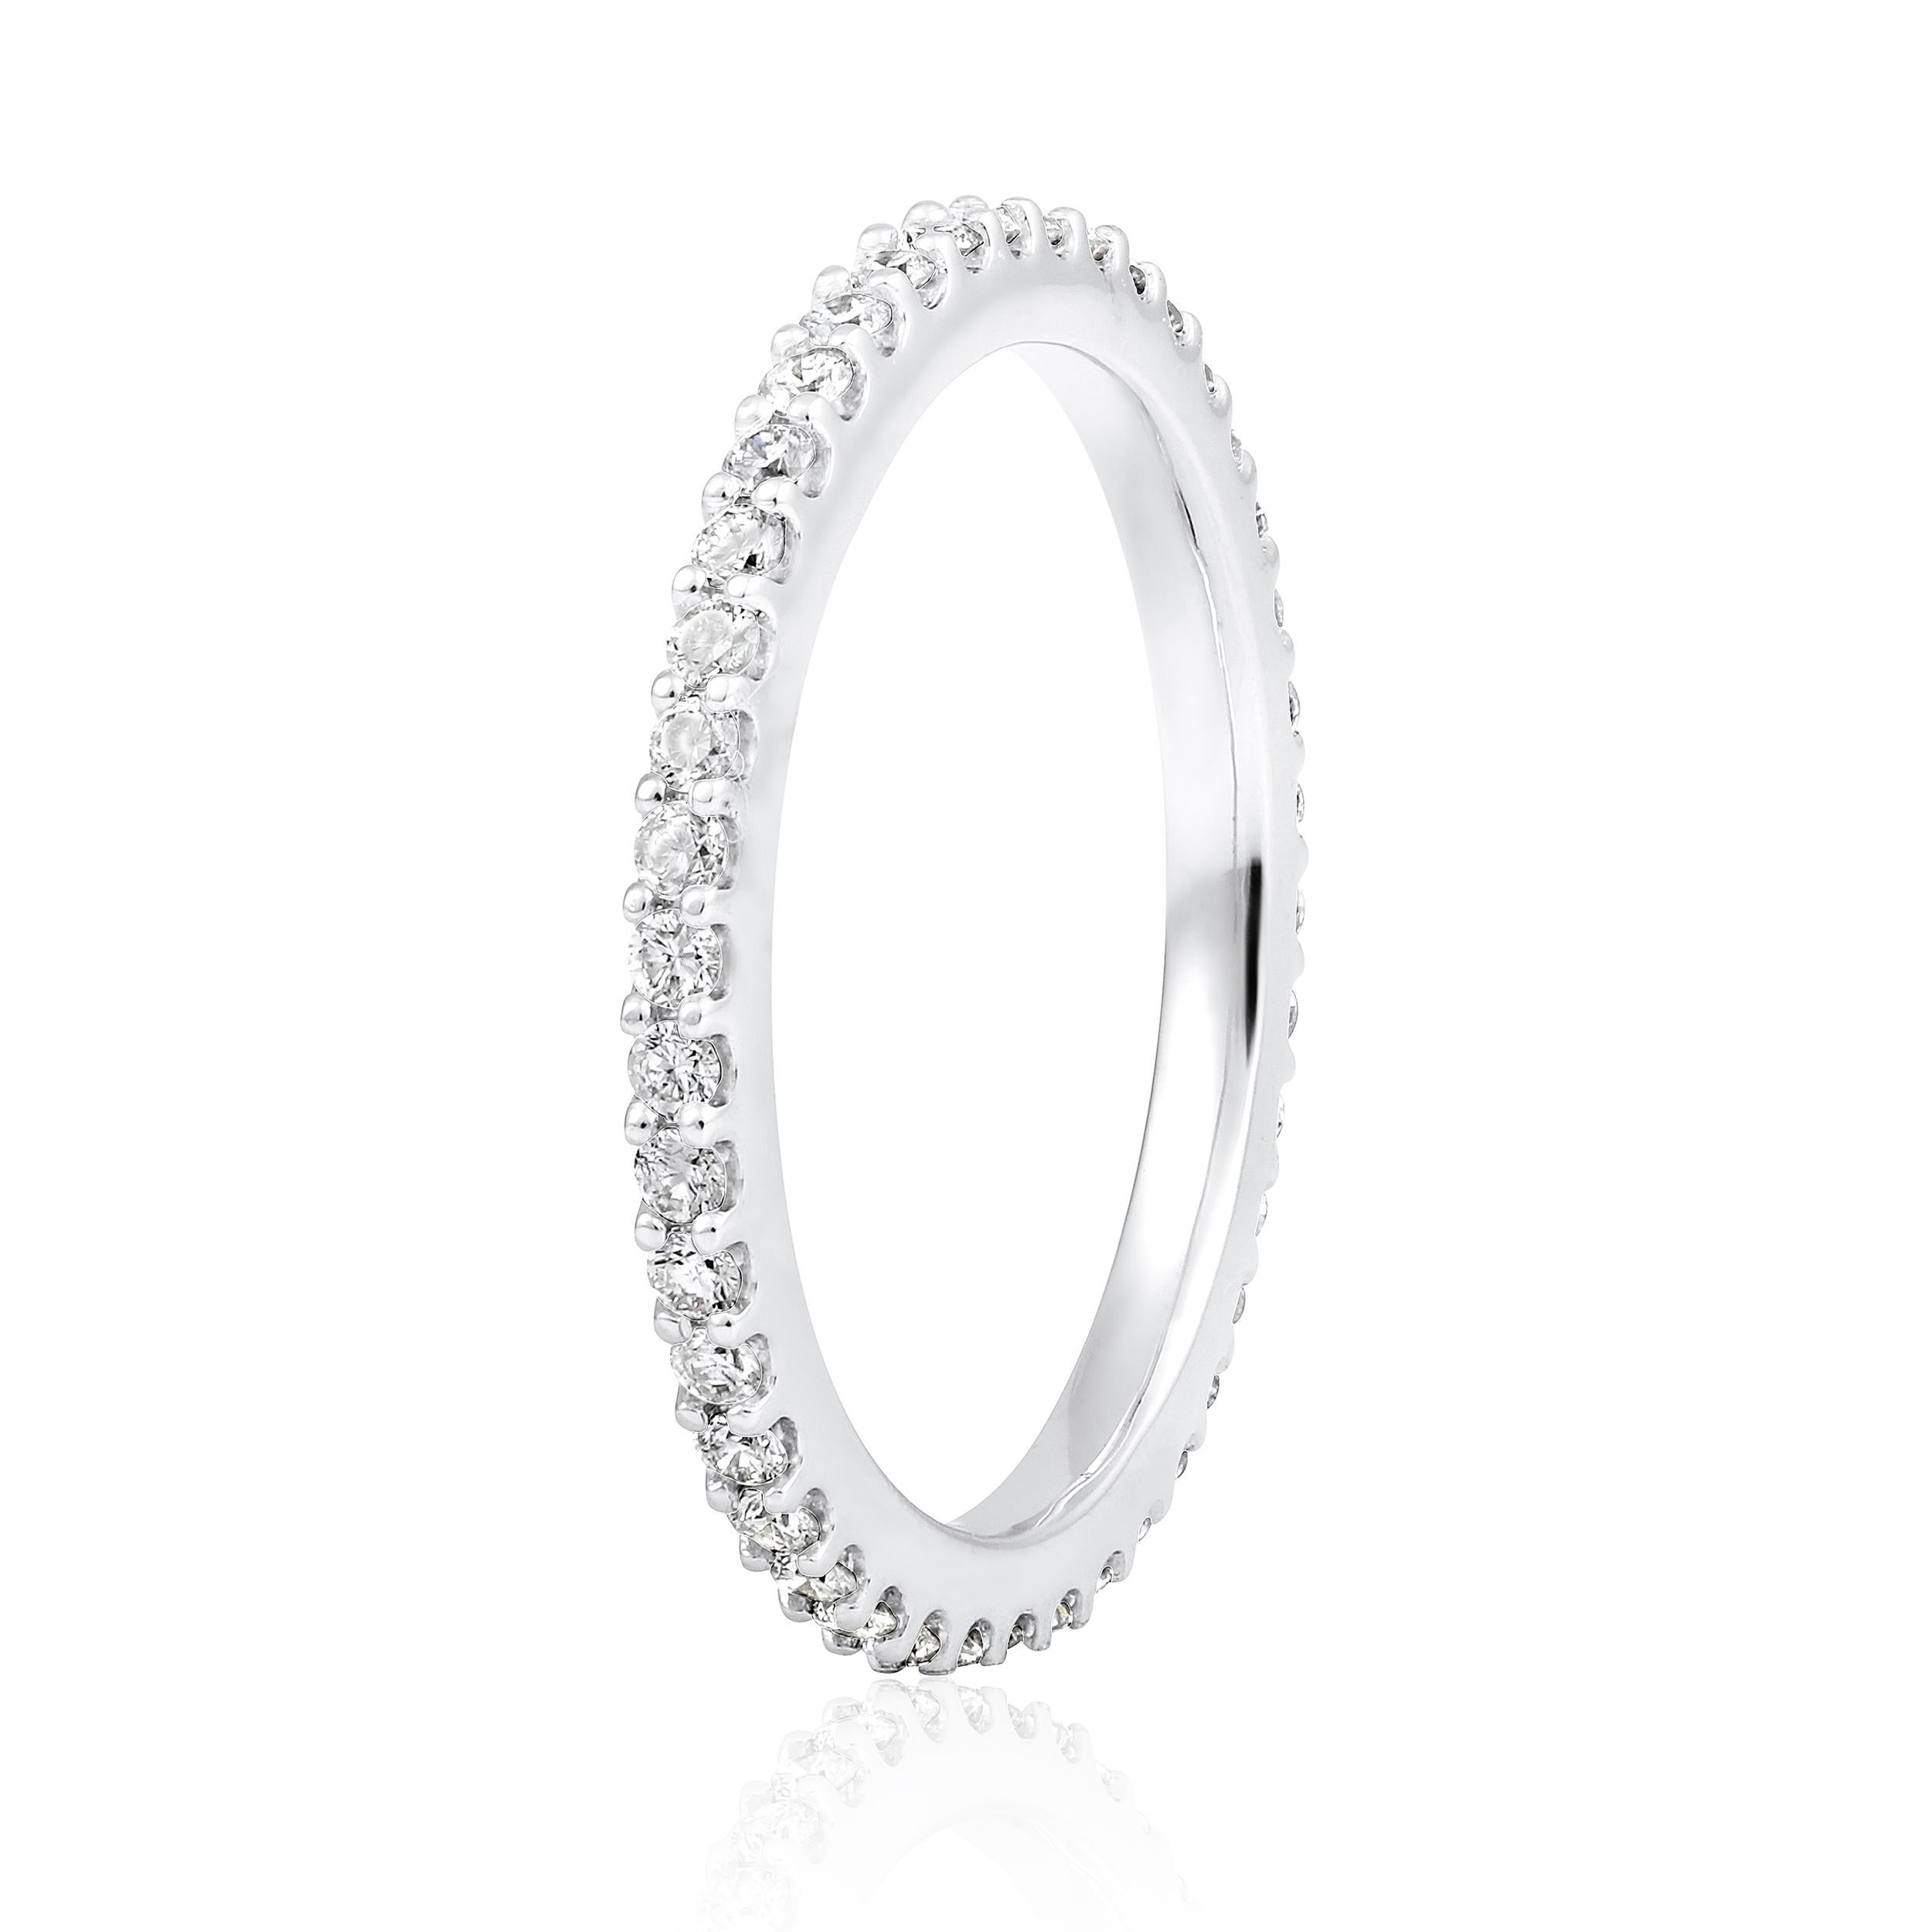 Ring Size: US 7 

Crafted in 2.14 grams of 14K White Gold, the ring contains 42 stones of Round Diamonds with a total of 0.5 carat in G-H color and SI clarity.

CONTEMPORARY AND TIMELESS ESSENCE: Crafted in 14-karat/18-karat with 100% natural